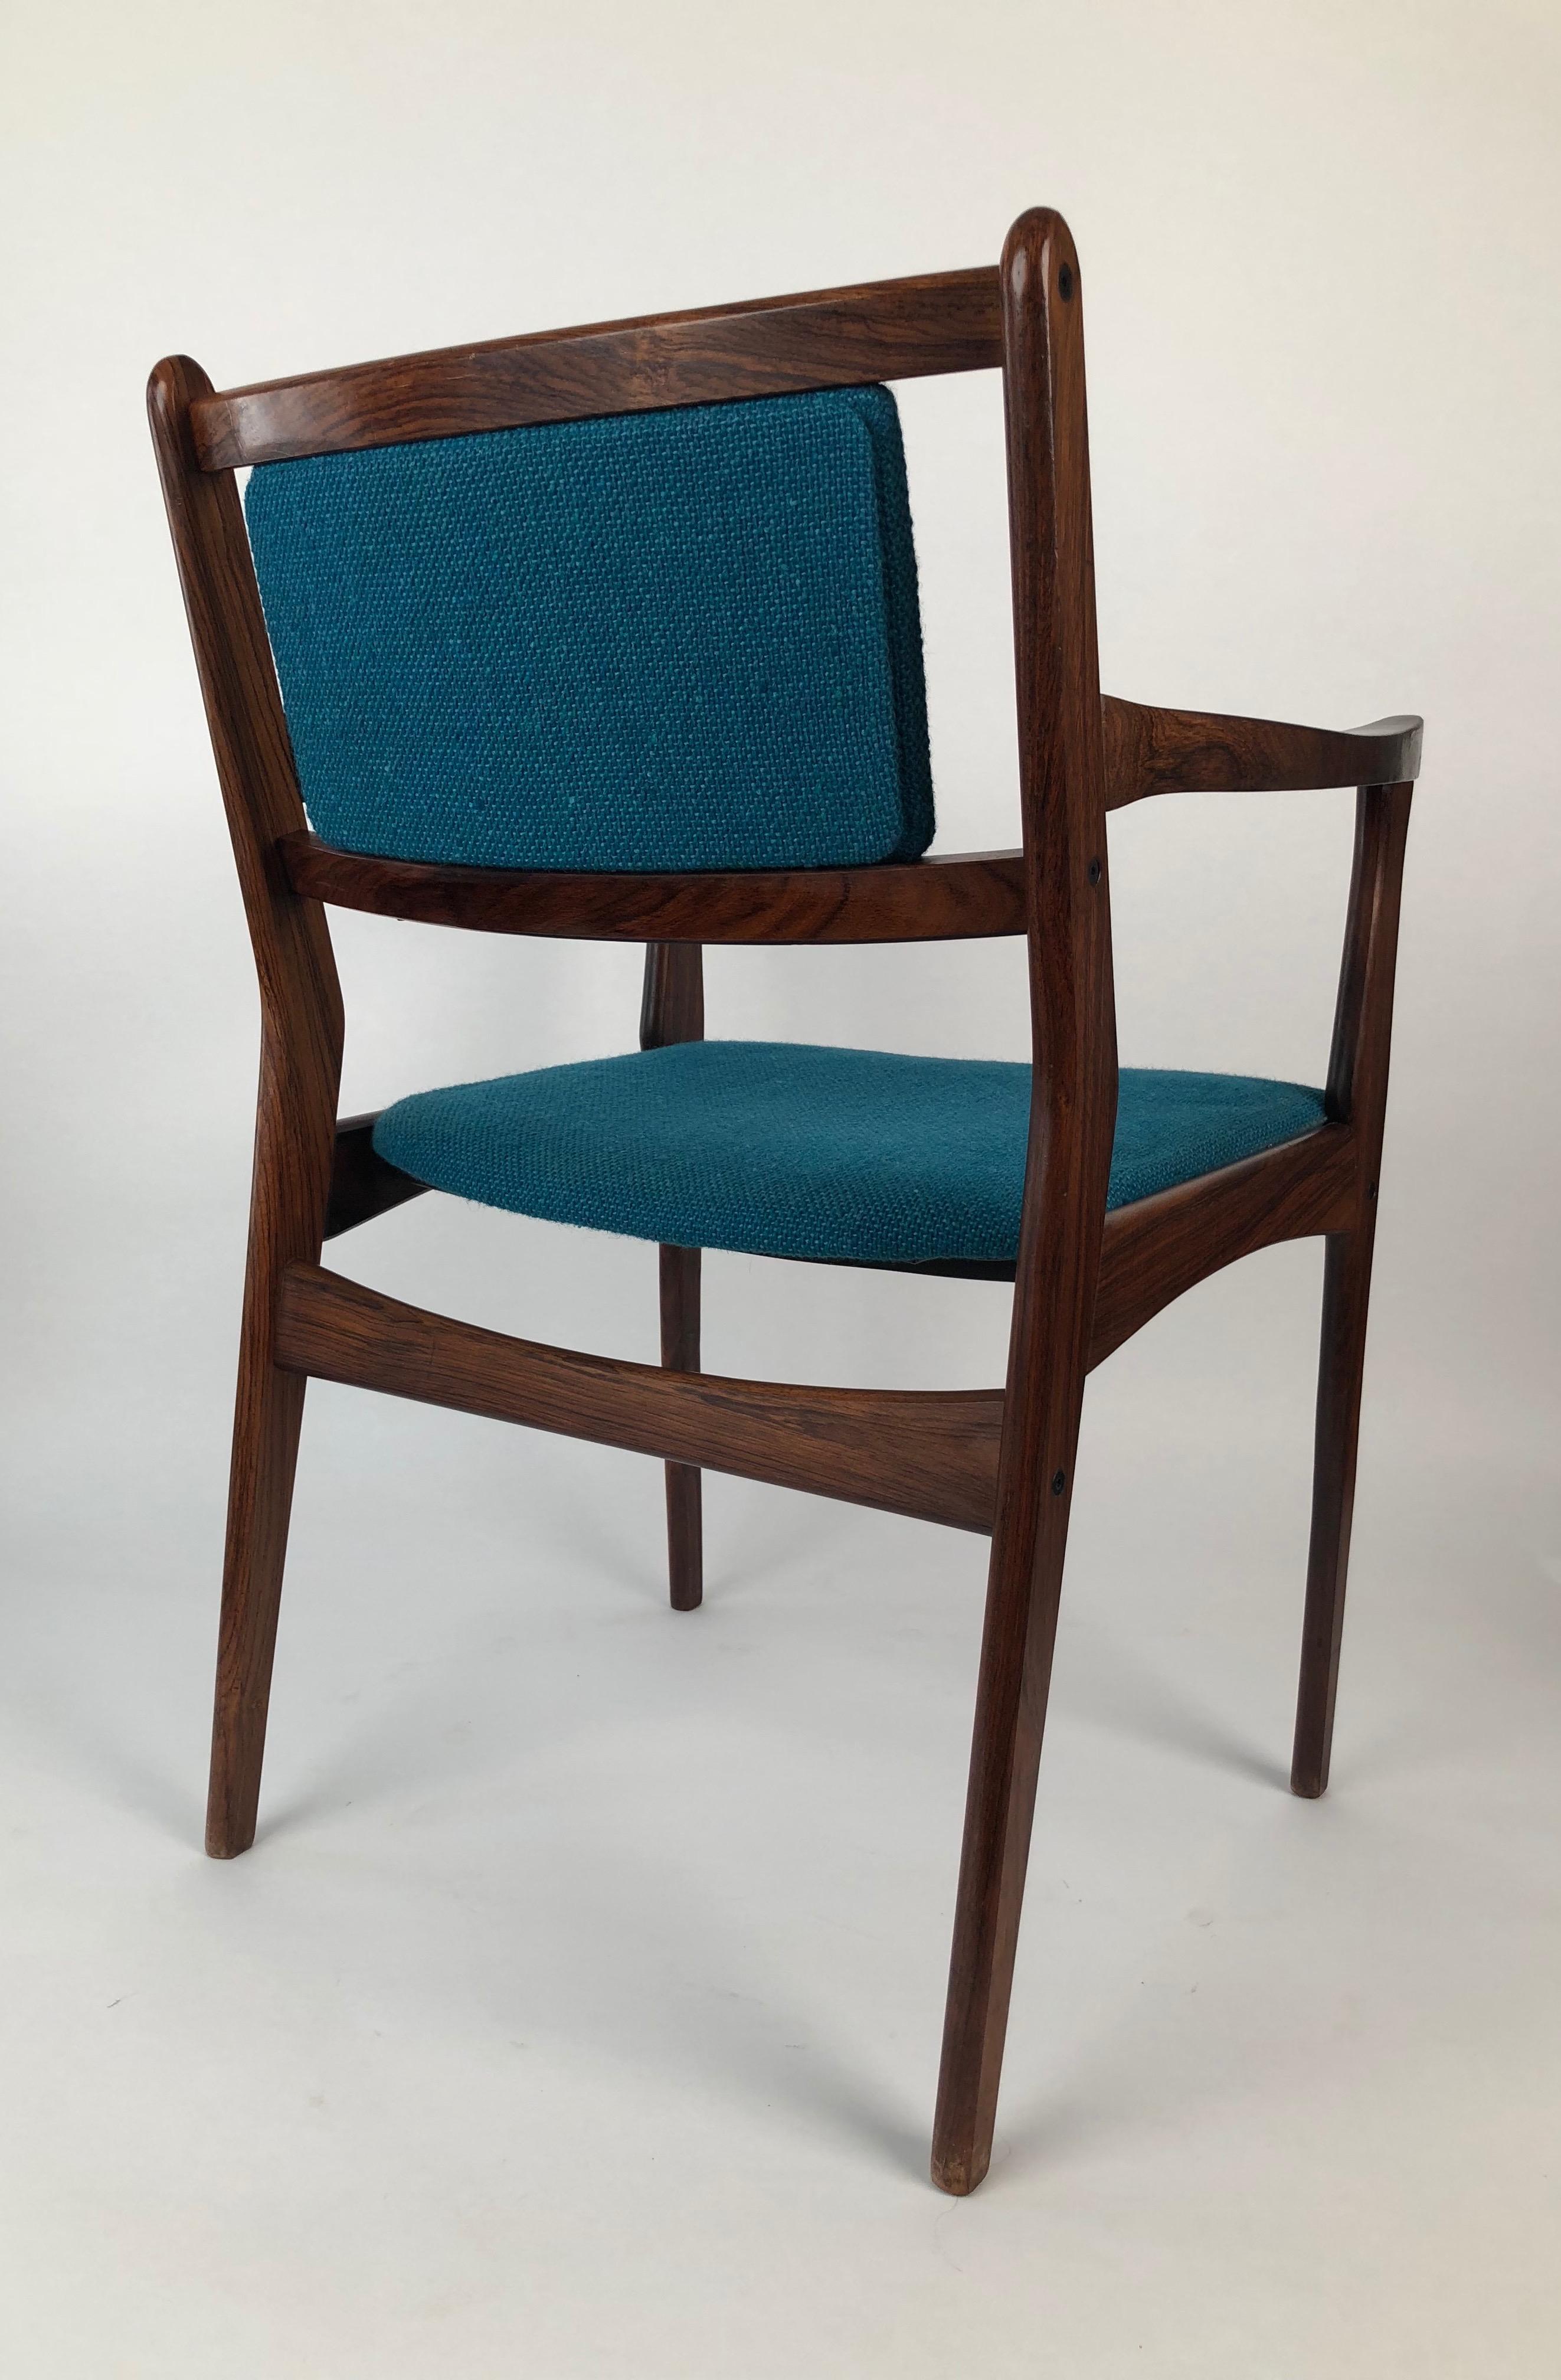 Set of Two Palisander Chairs with Turquoise Fabric from the 1960s For Sale 7